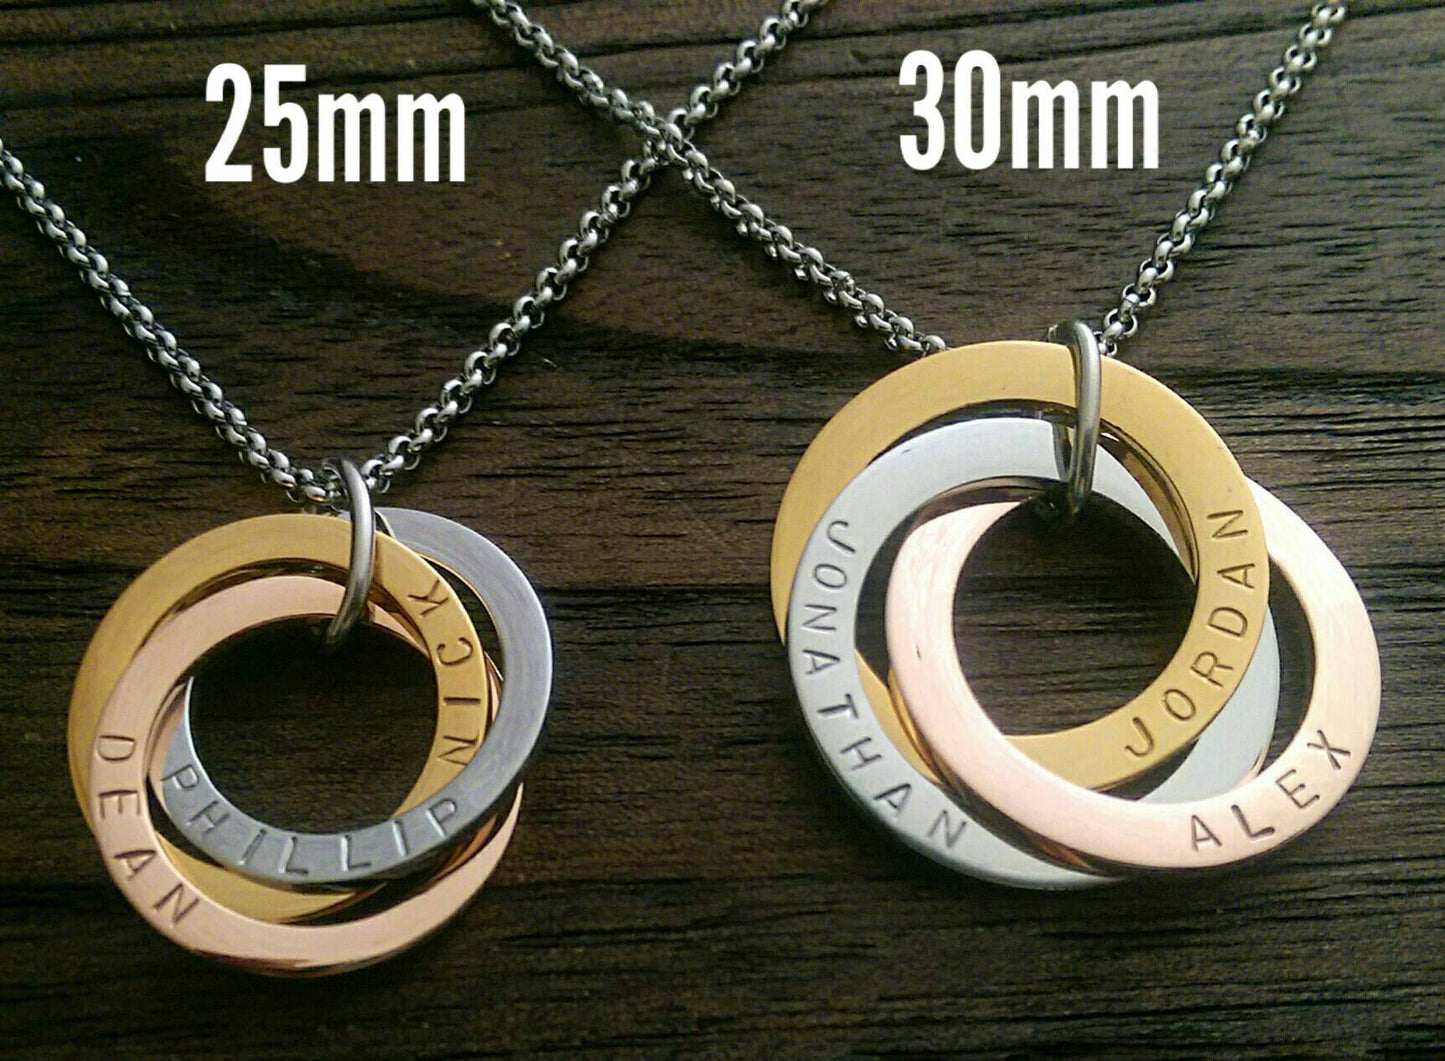 Russian Connecting Ring Necklace Personalised Hand Stamped 25mm Rings